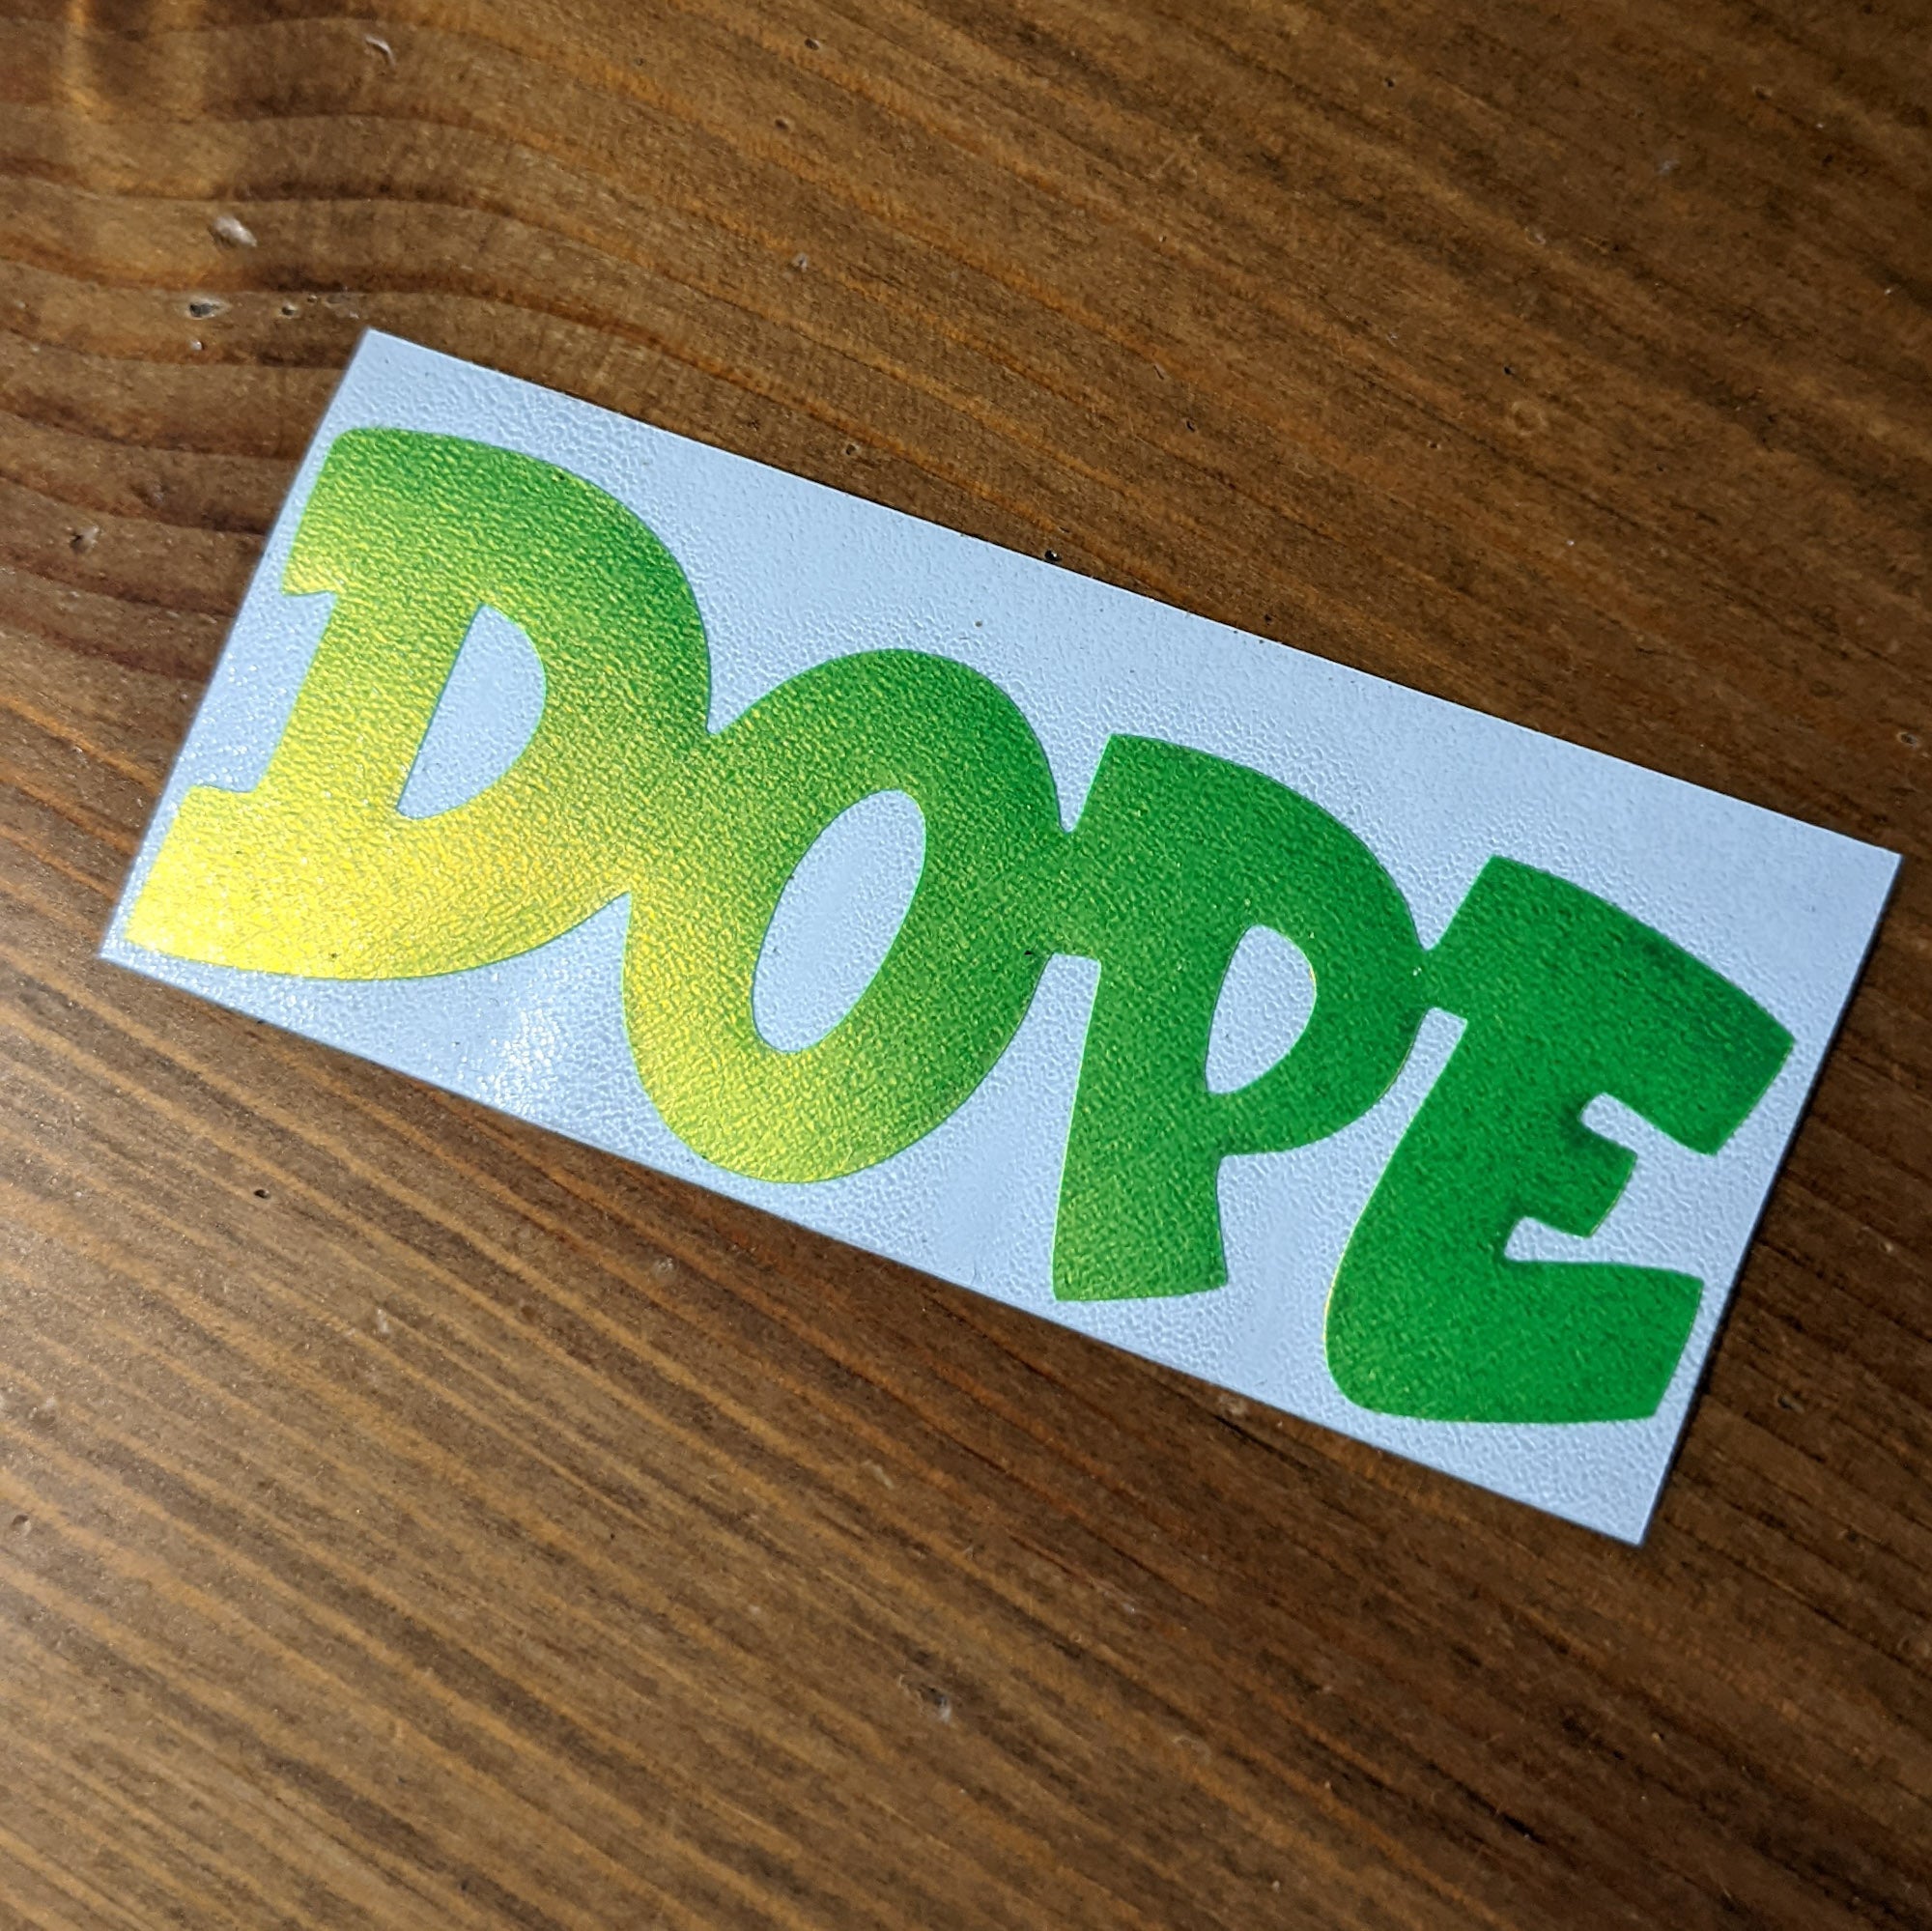 Limited Edition "DOPE" Vinyl Decal